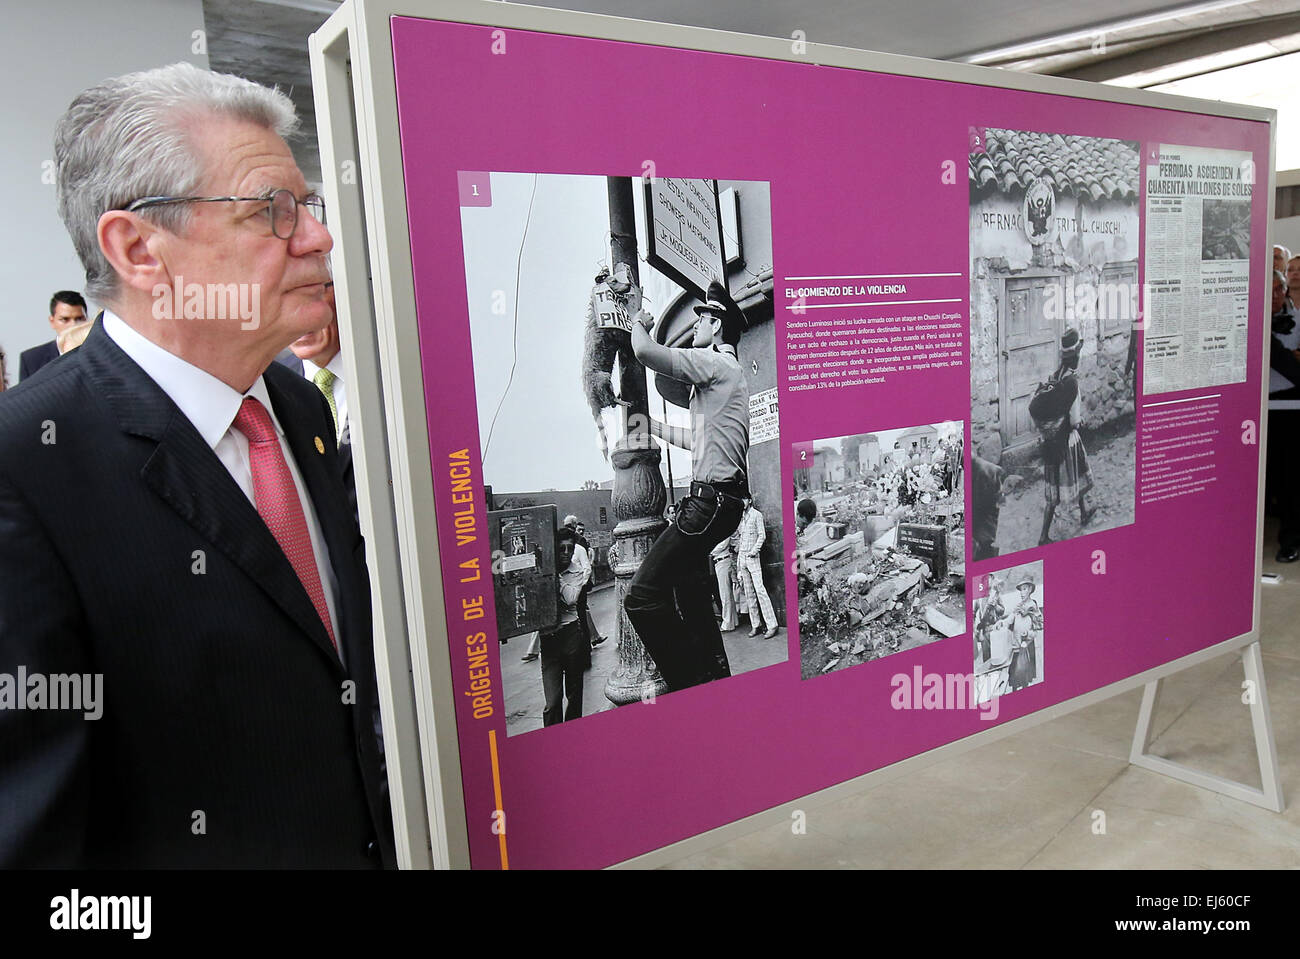 Lima, Peru. 21st Mar, 2015. German President Joachim Gauck visits an exhibition on the time of the armed, internal conflict in Peru in the 'Lugar de la Memoria' museum in Lima, Peru, 21 March 2015. The German president is on a multi-day visit to South America. Photo: WOLFGANG KUMM/dpa/Alamy Live News Stock Photo